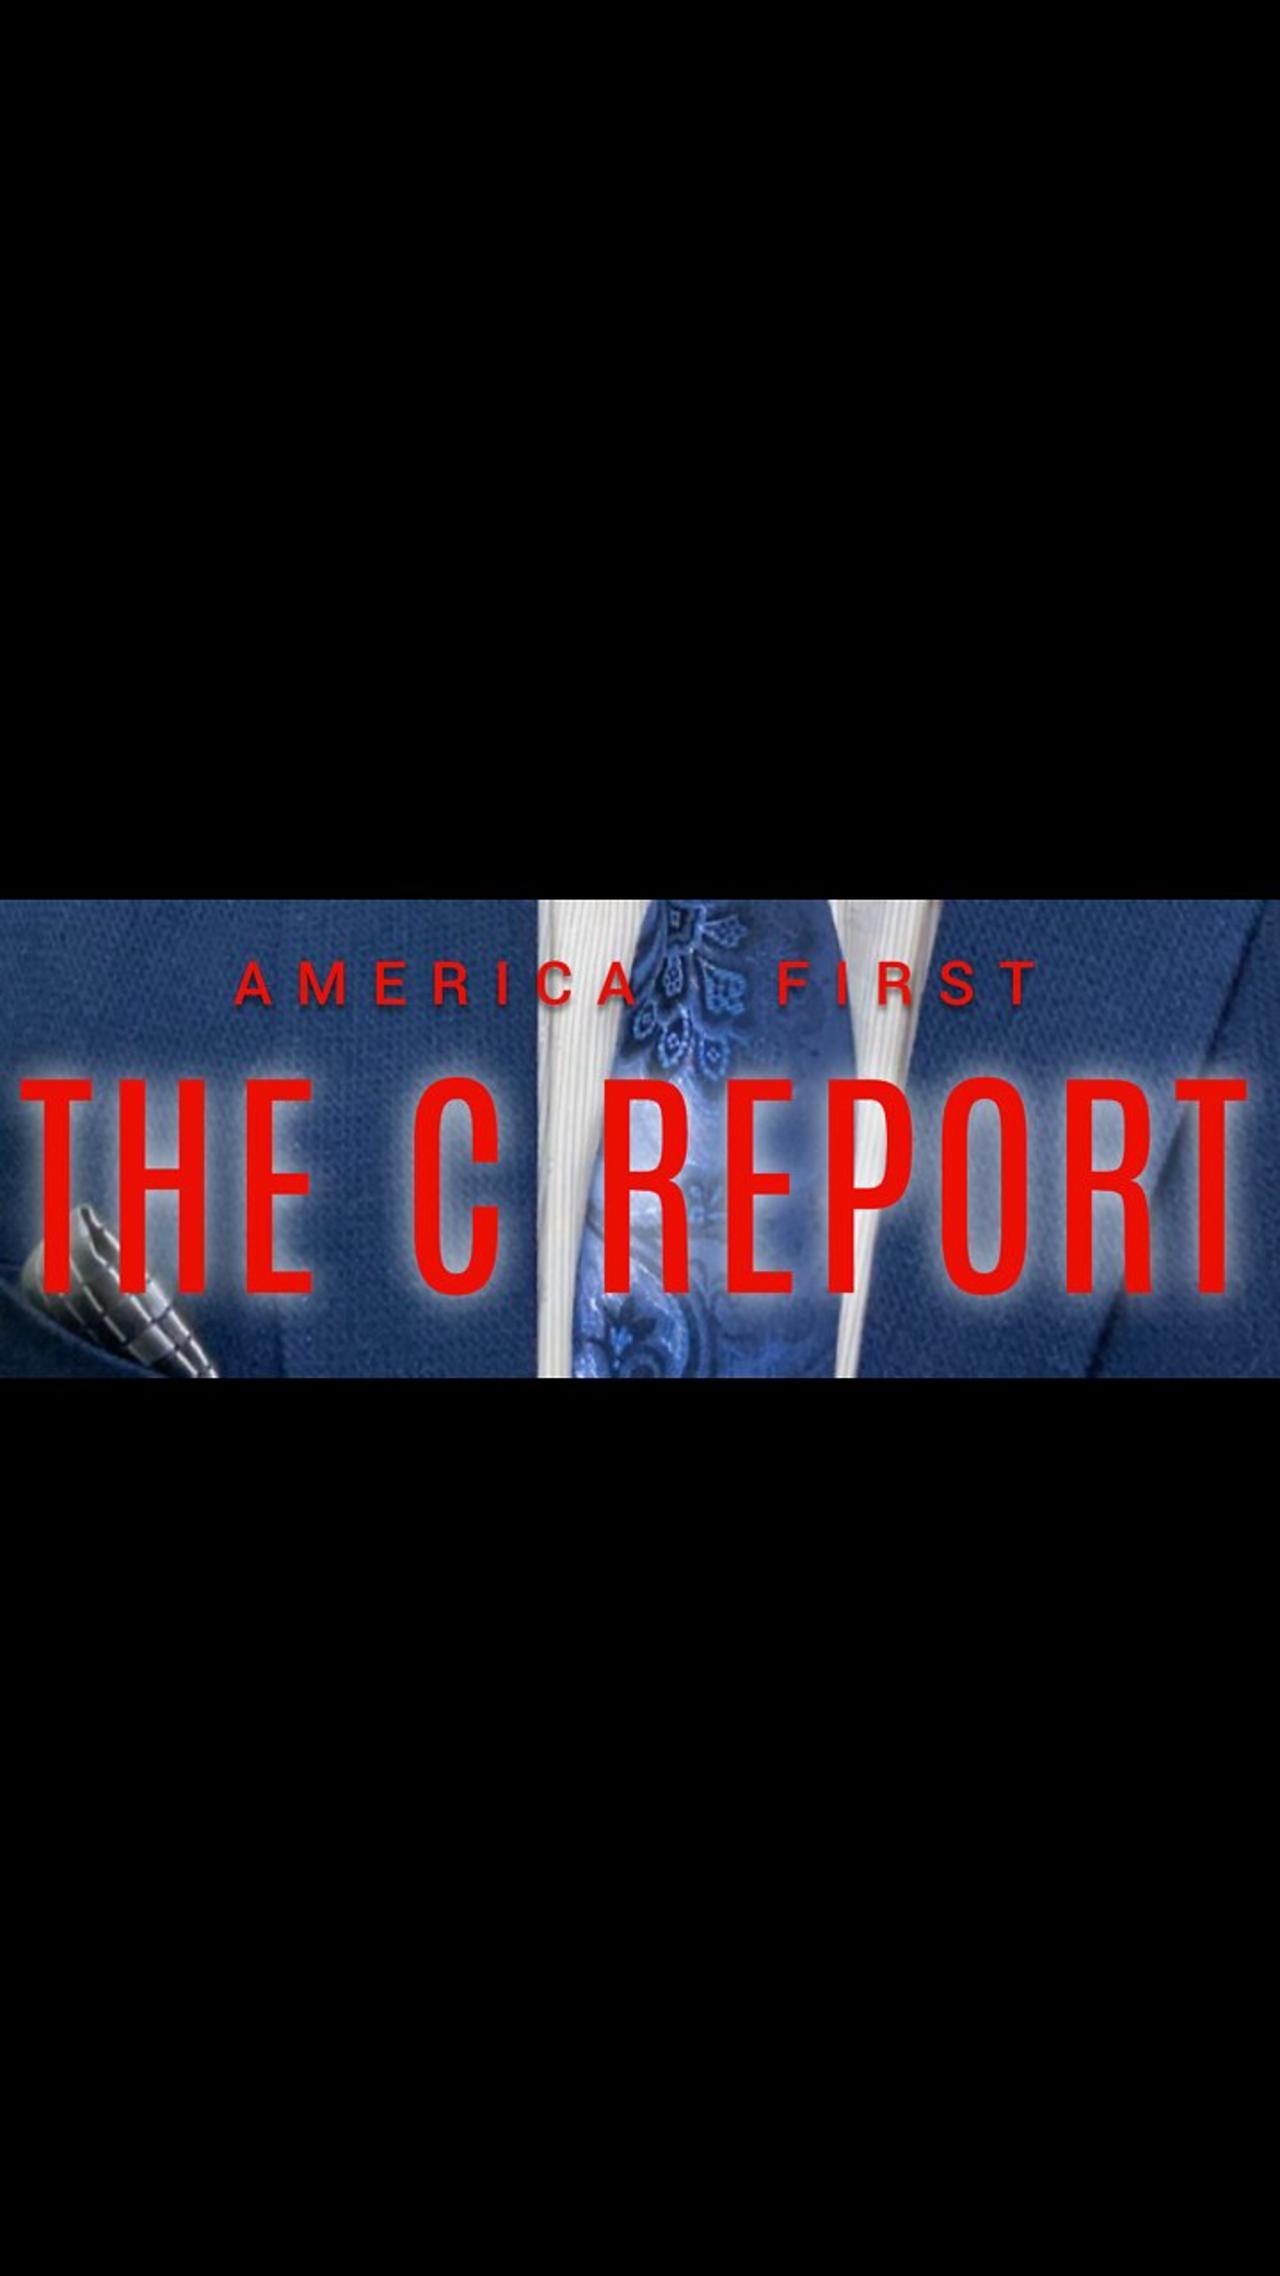 The C Report #331: The America First Secretary of State Candidates Episode - Part 2